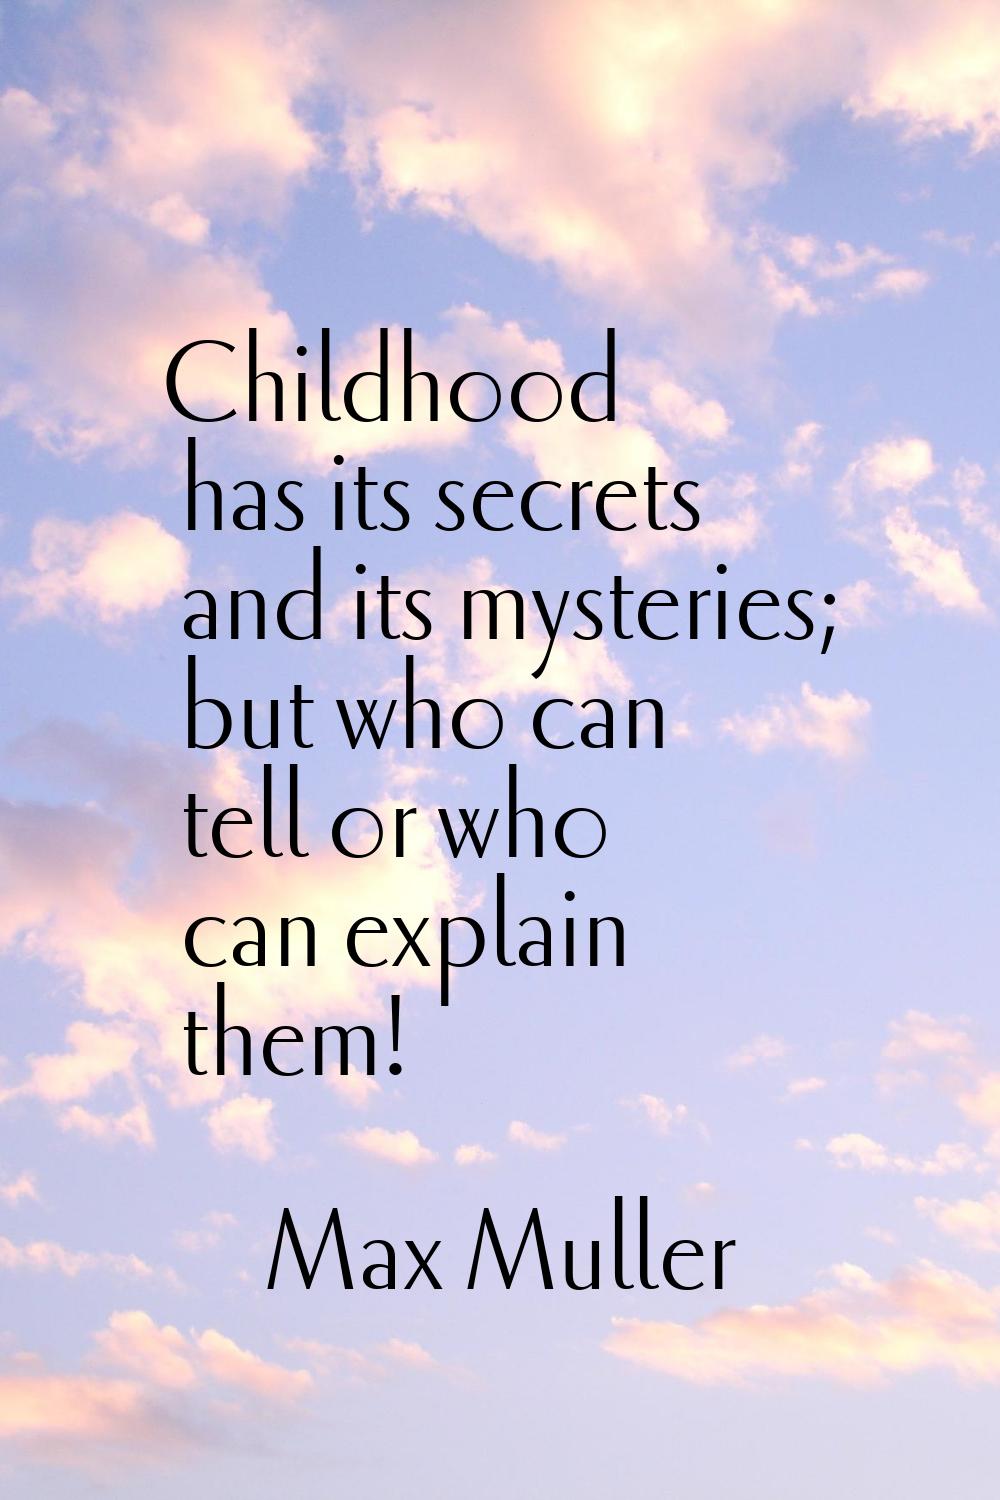 Childhood has its secrets and its mysteries; but who can tell or who can explain them!